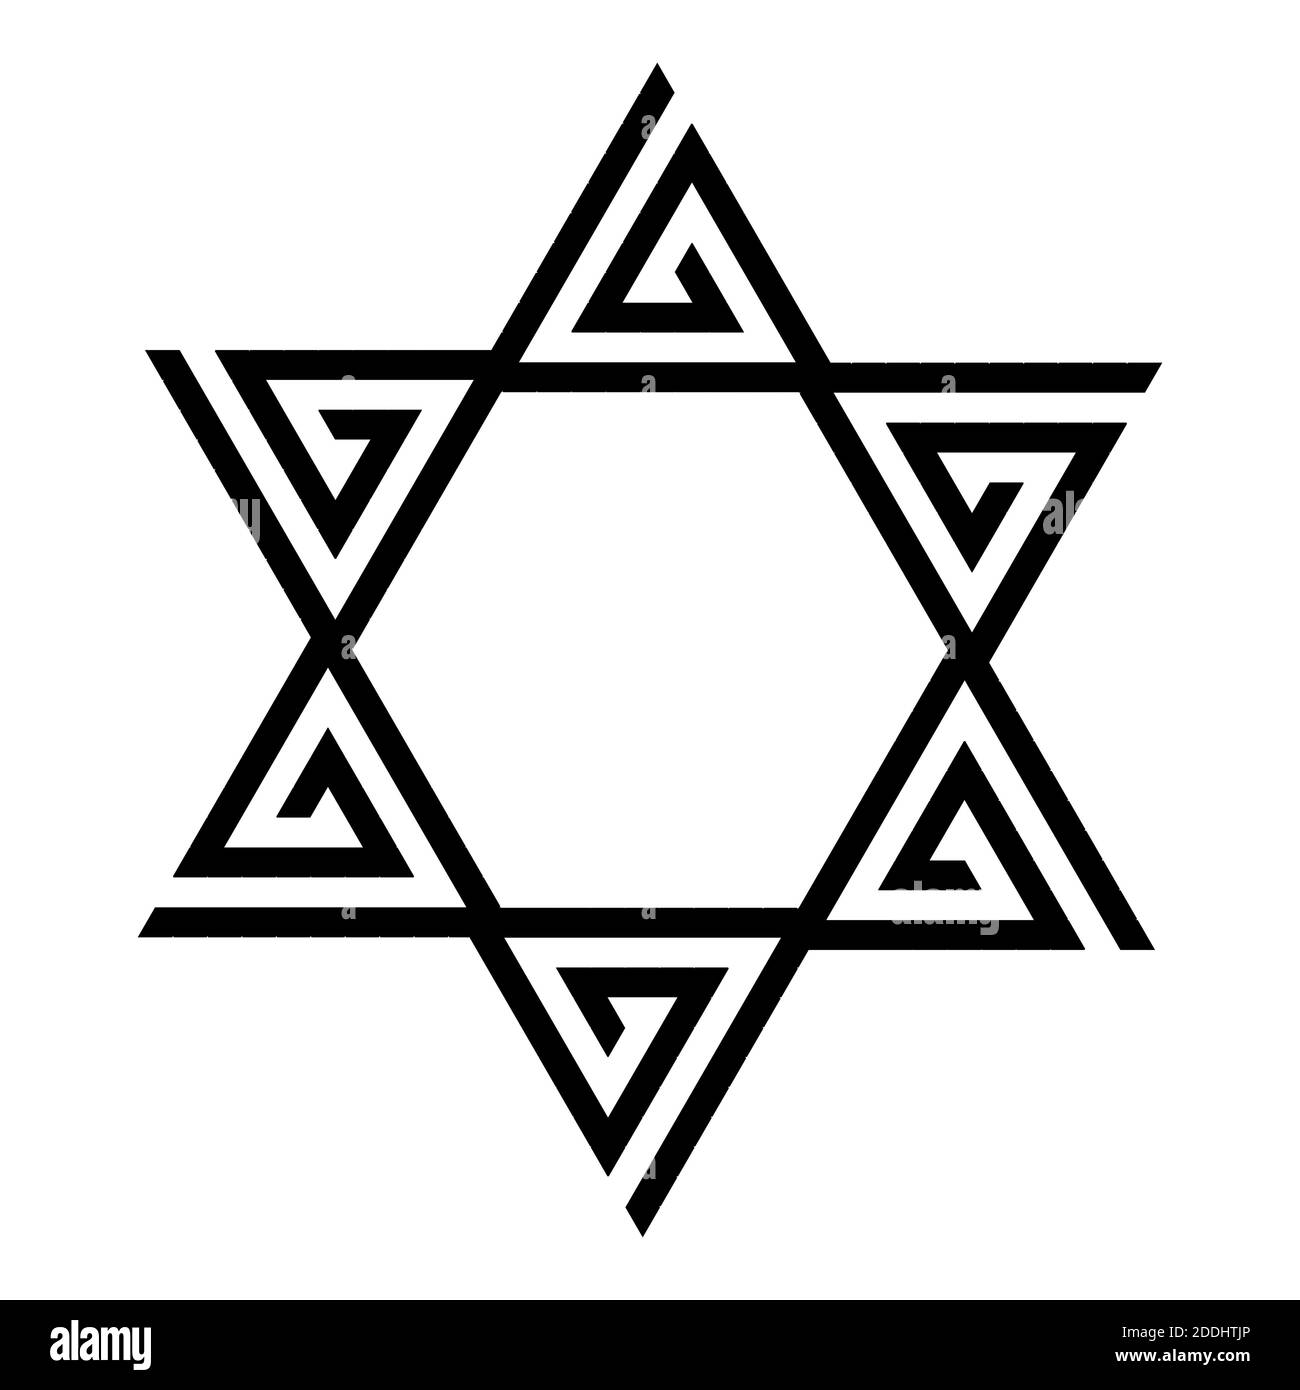 Star Of David Tattoo Meaning And Ideas